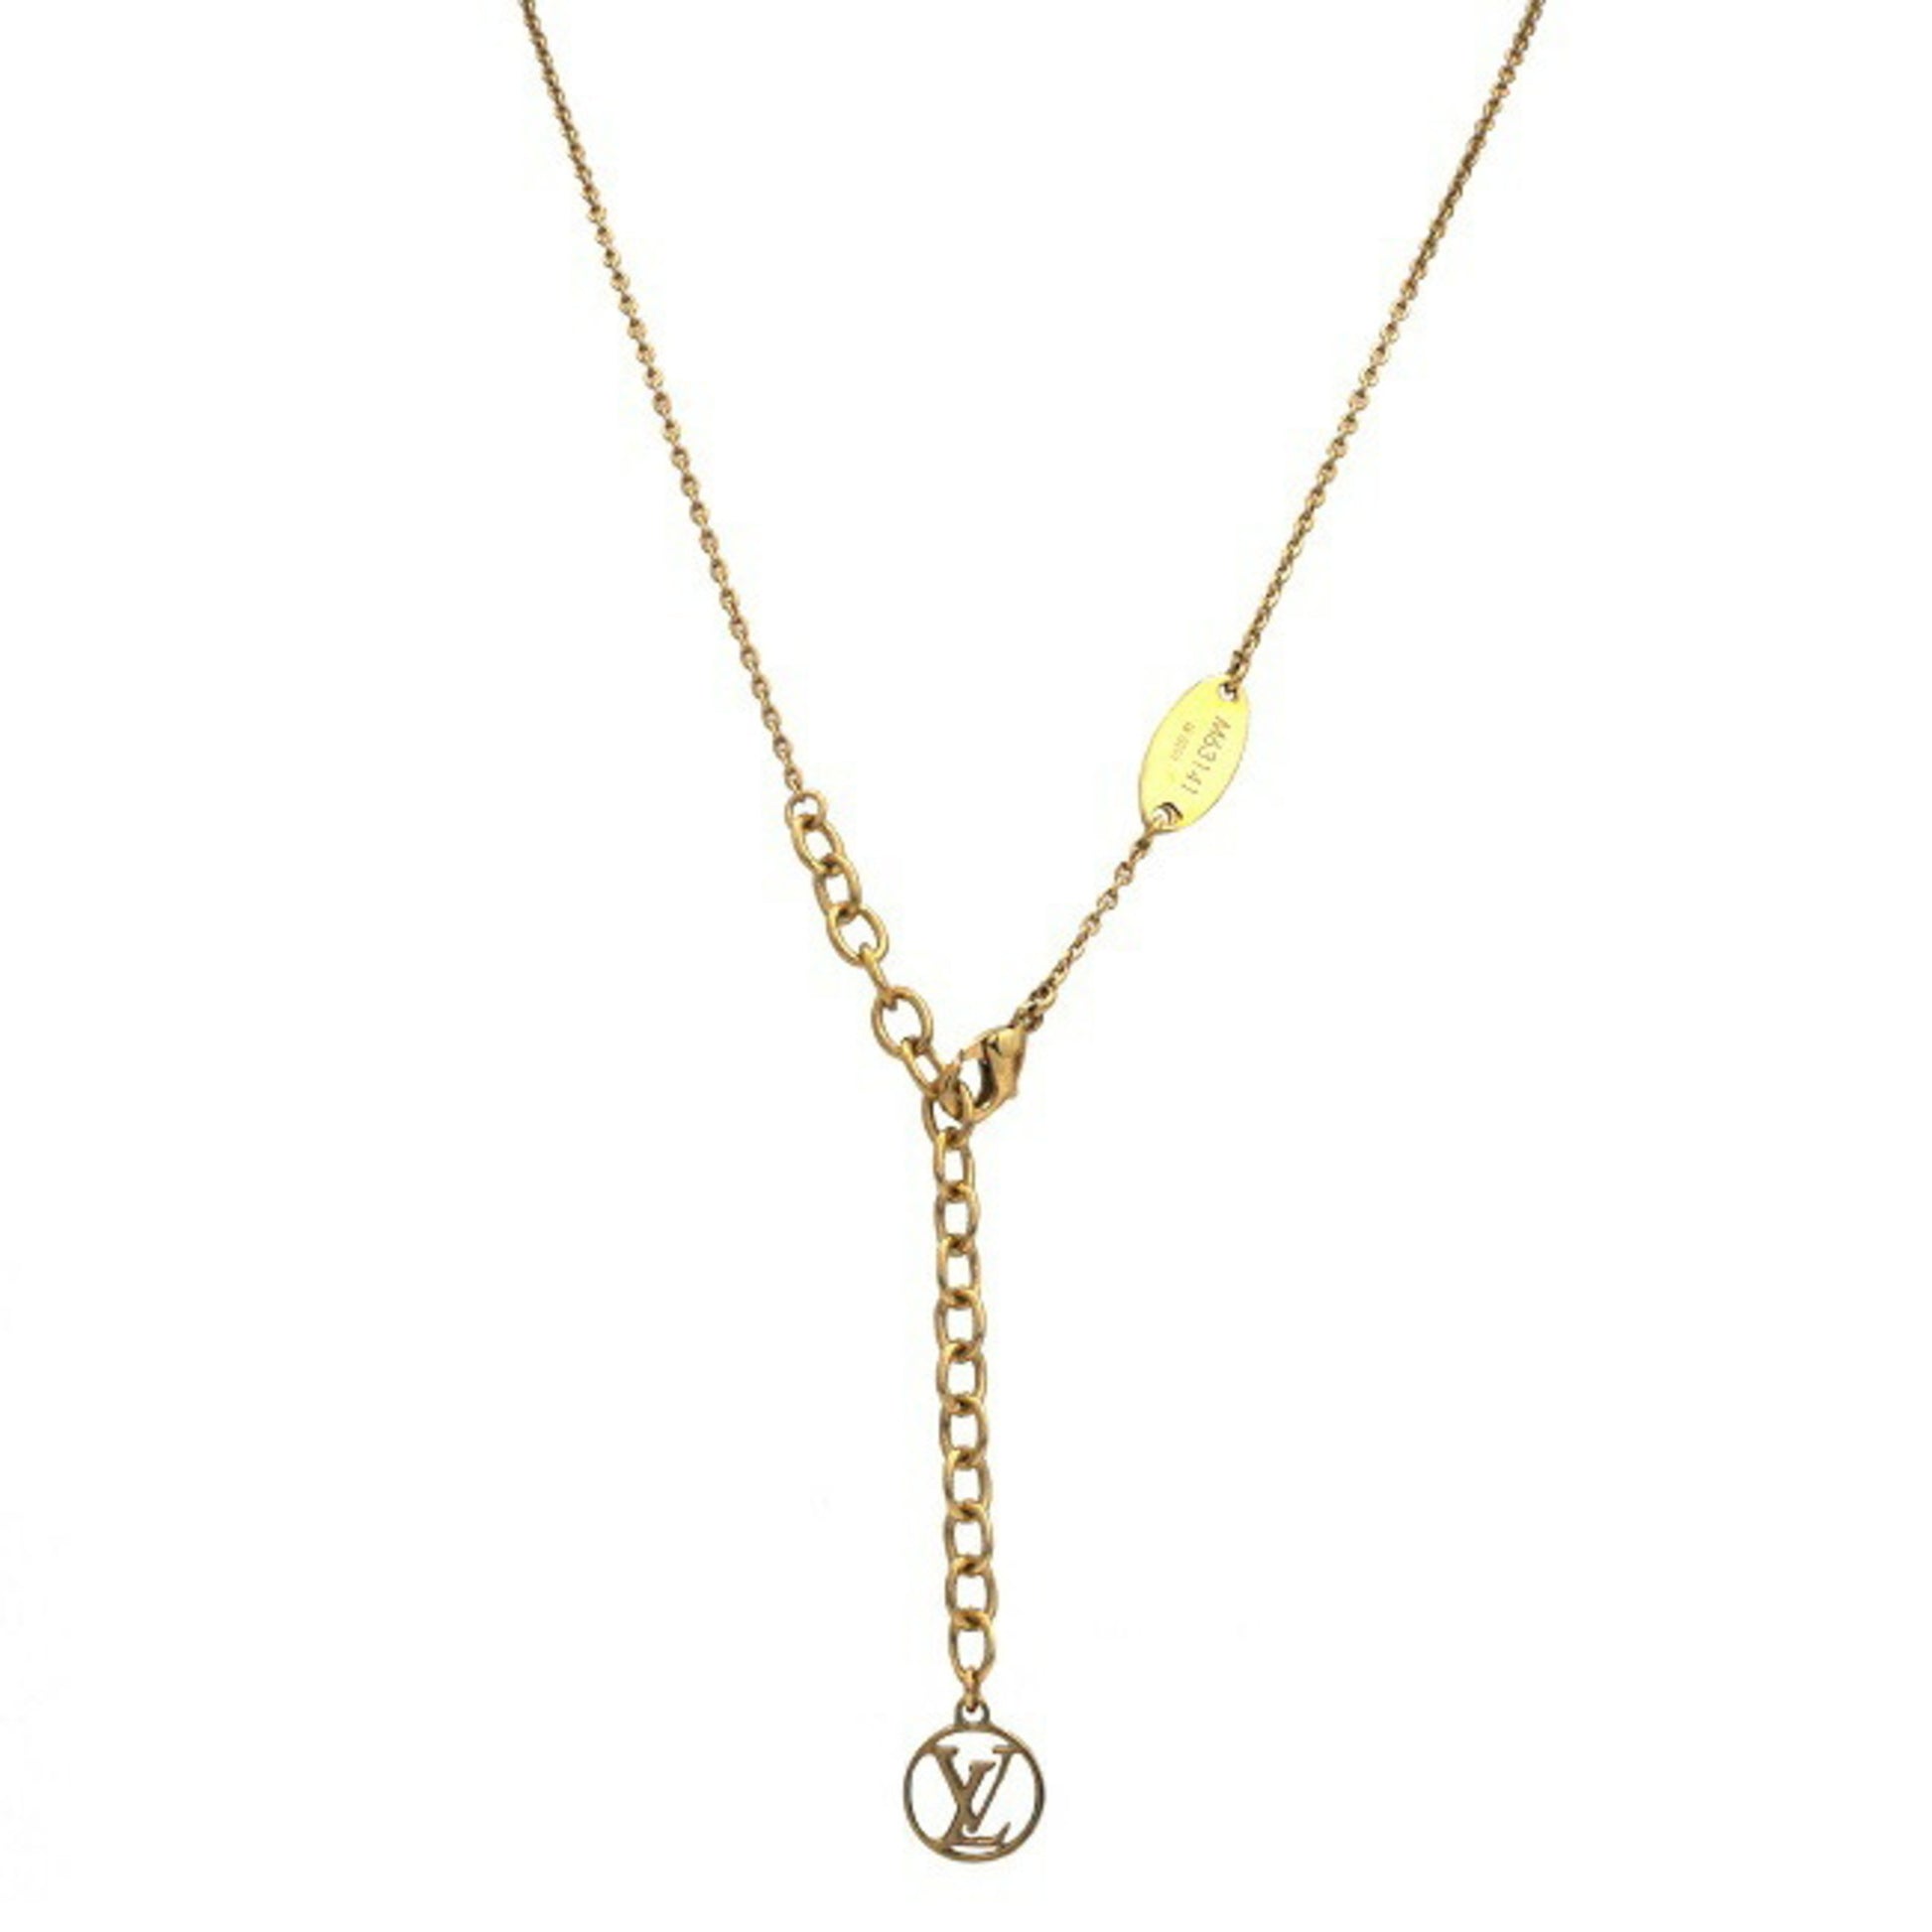 Authenticated used Louis Vuitton Necklace Nanogram M63141 Metal Women's Pendant Necklace (Gold,silver), Adult Unisex, Size: One size, Grey Type